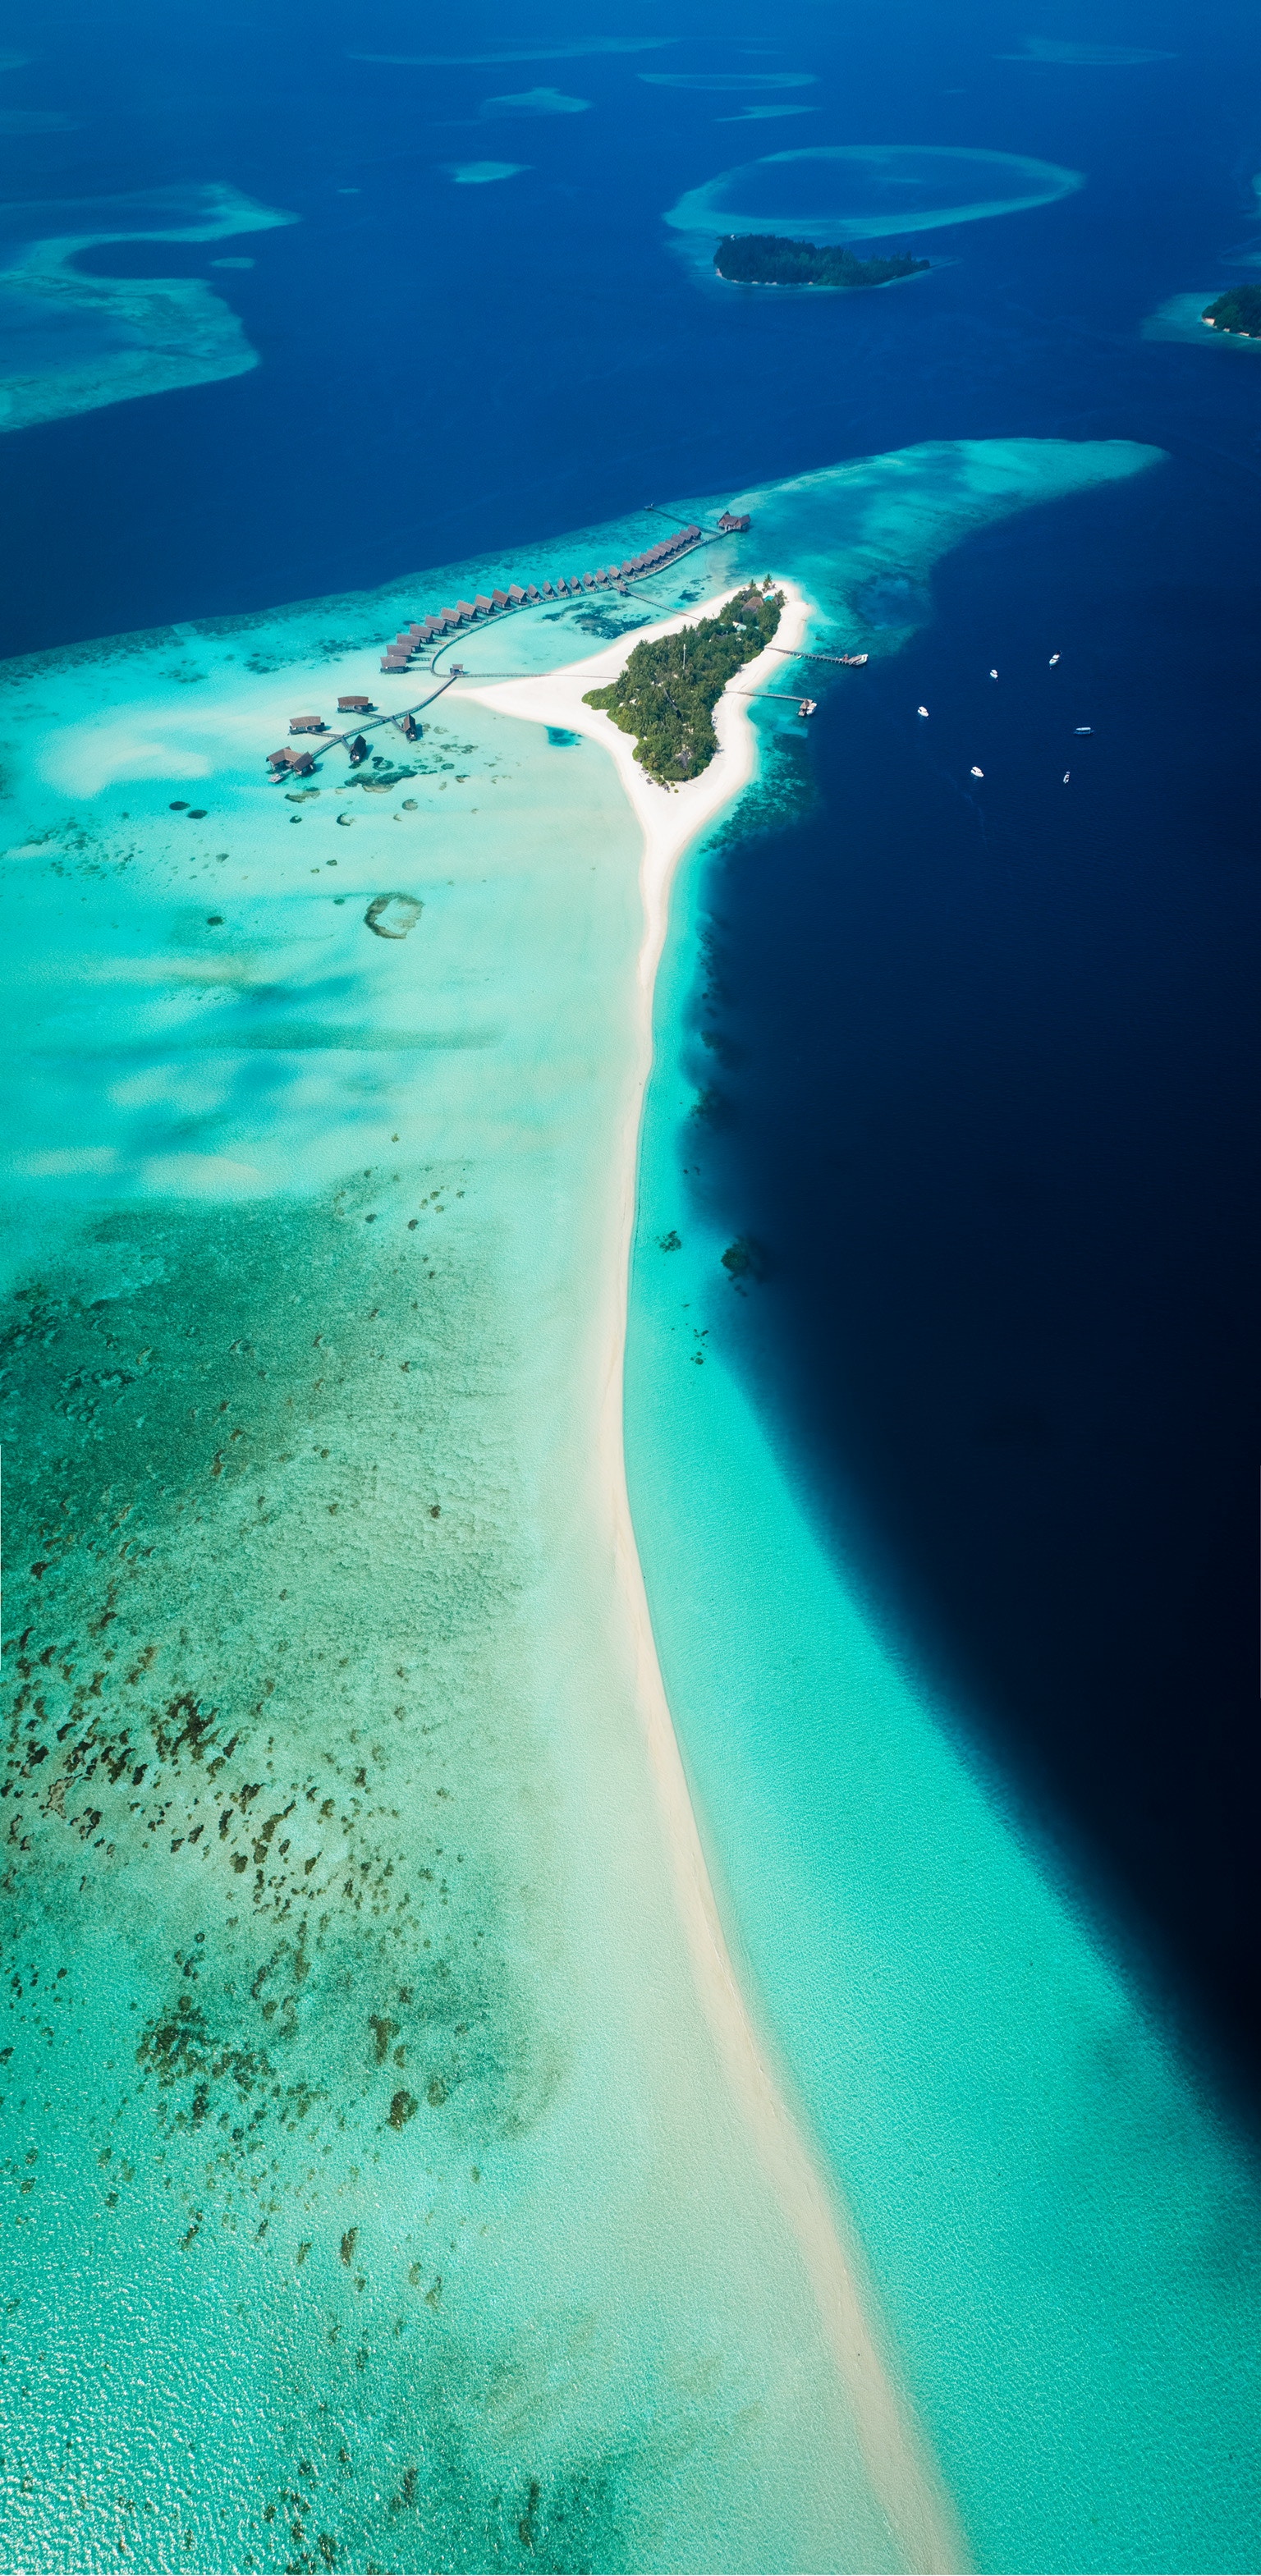 maldives, nature, view from above, ocean, tropics, island cell phone wallpapers